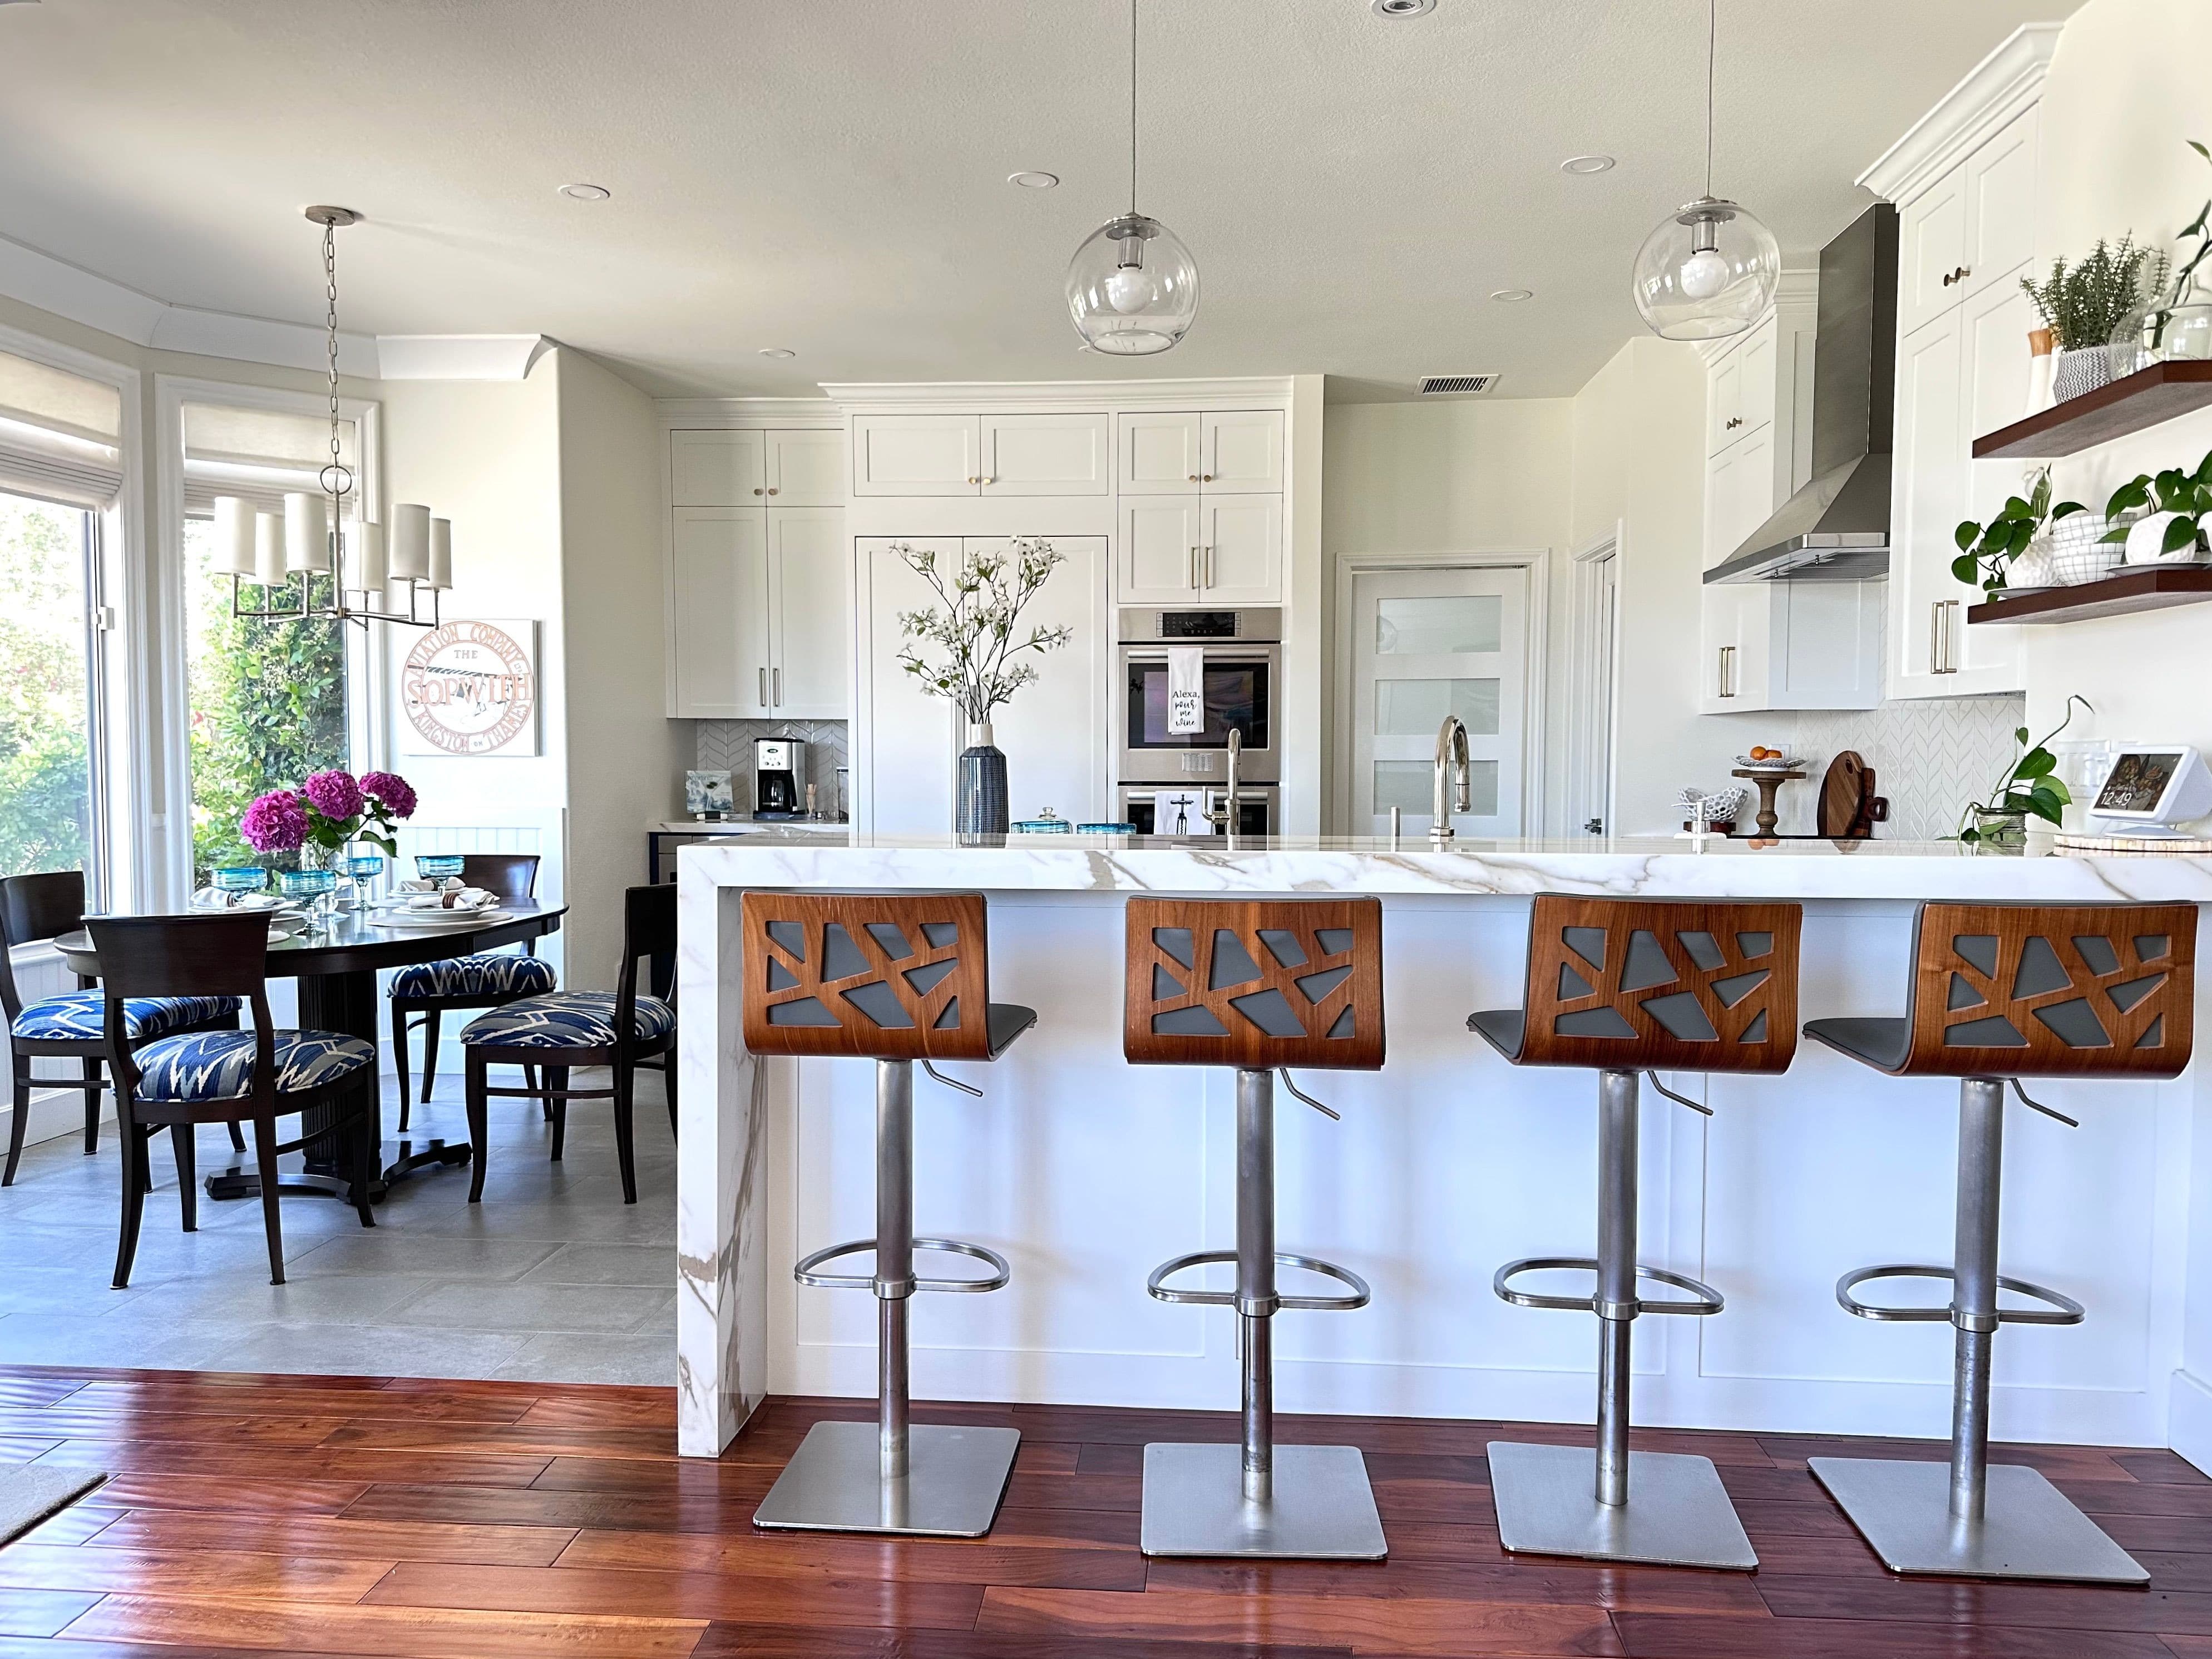 Thibaut upholstered kitchen chairs, White cabinets with shaker style and marble counters. Pendant lights.